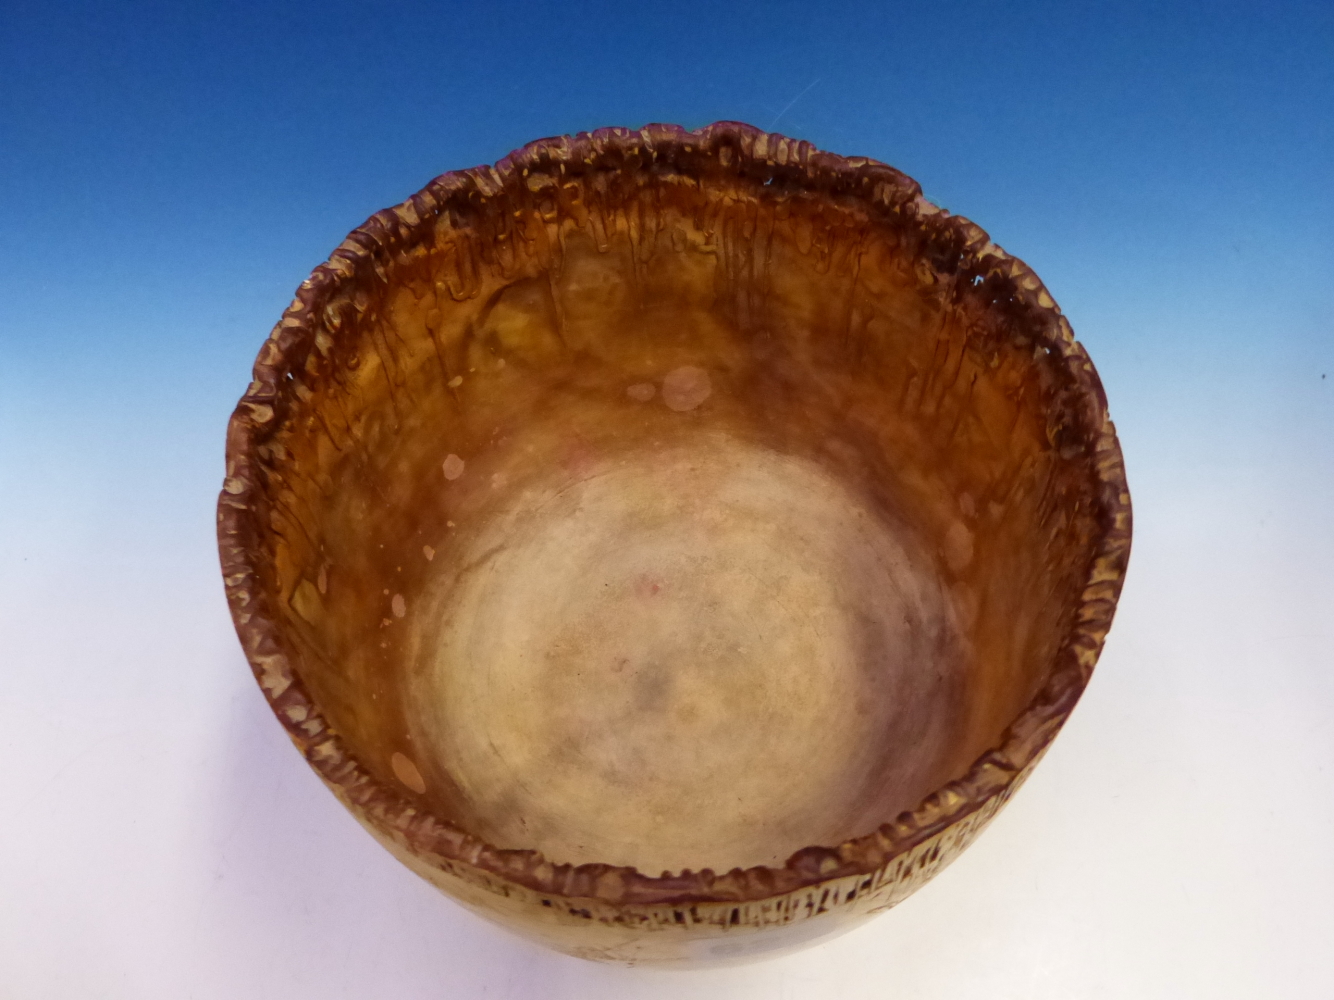 A STUDIO POTTERY BOWL BUILT OF DRIPS AND BLOCKS OF BEIGE SLIPS WITH TERRACOTTA RED INCLUSIONS, THE - Image 2 of 5